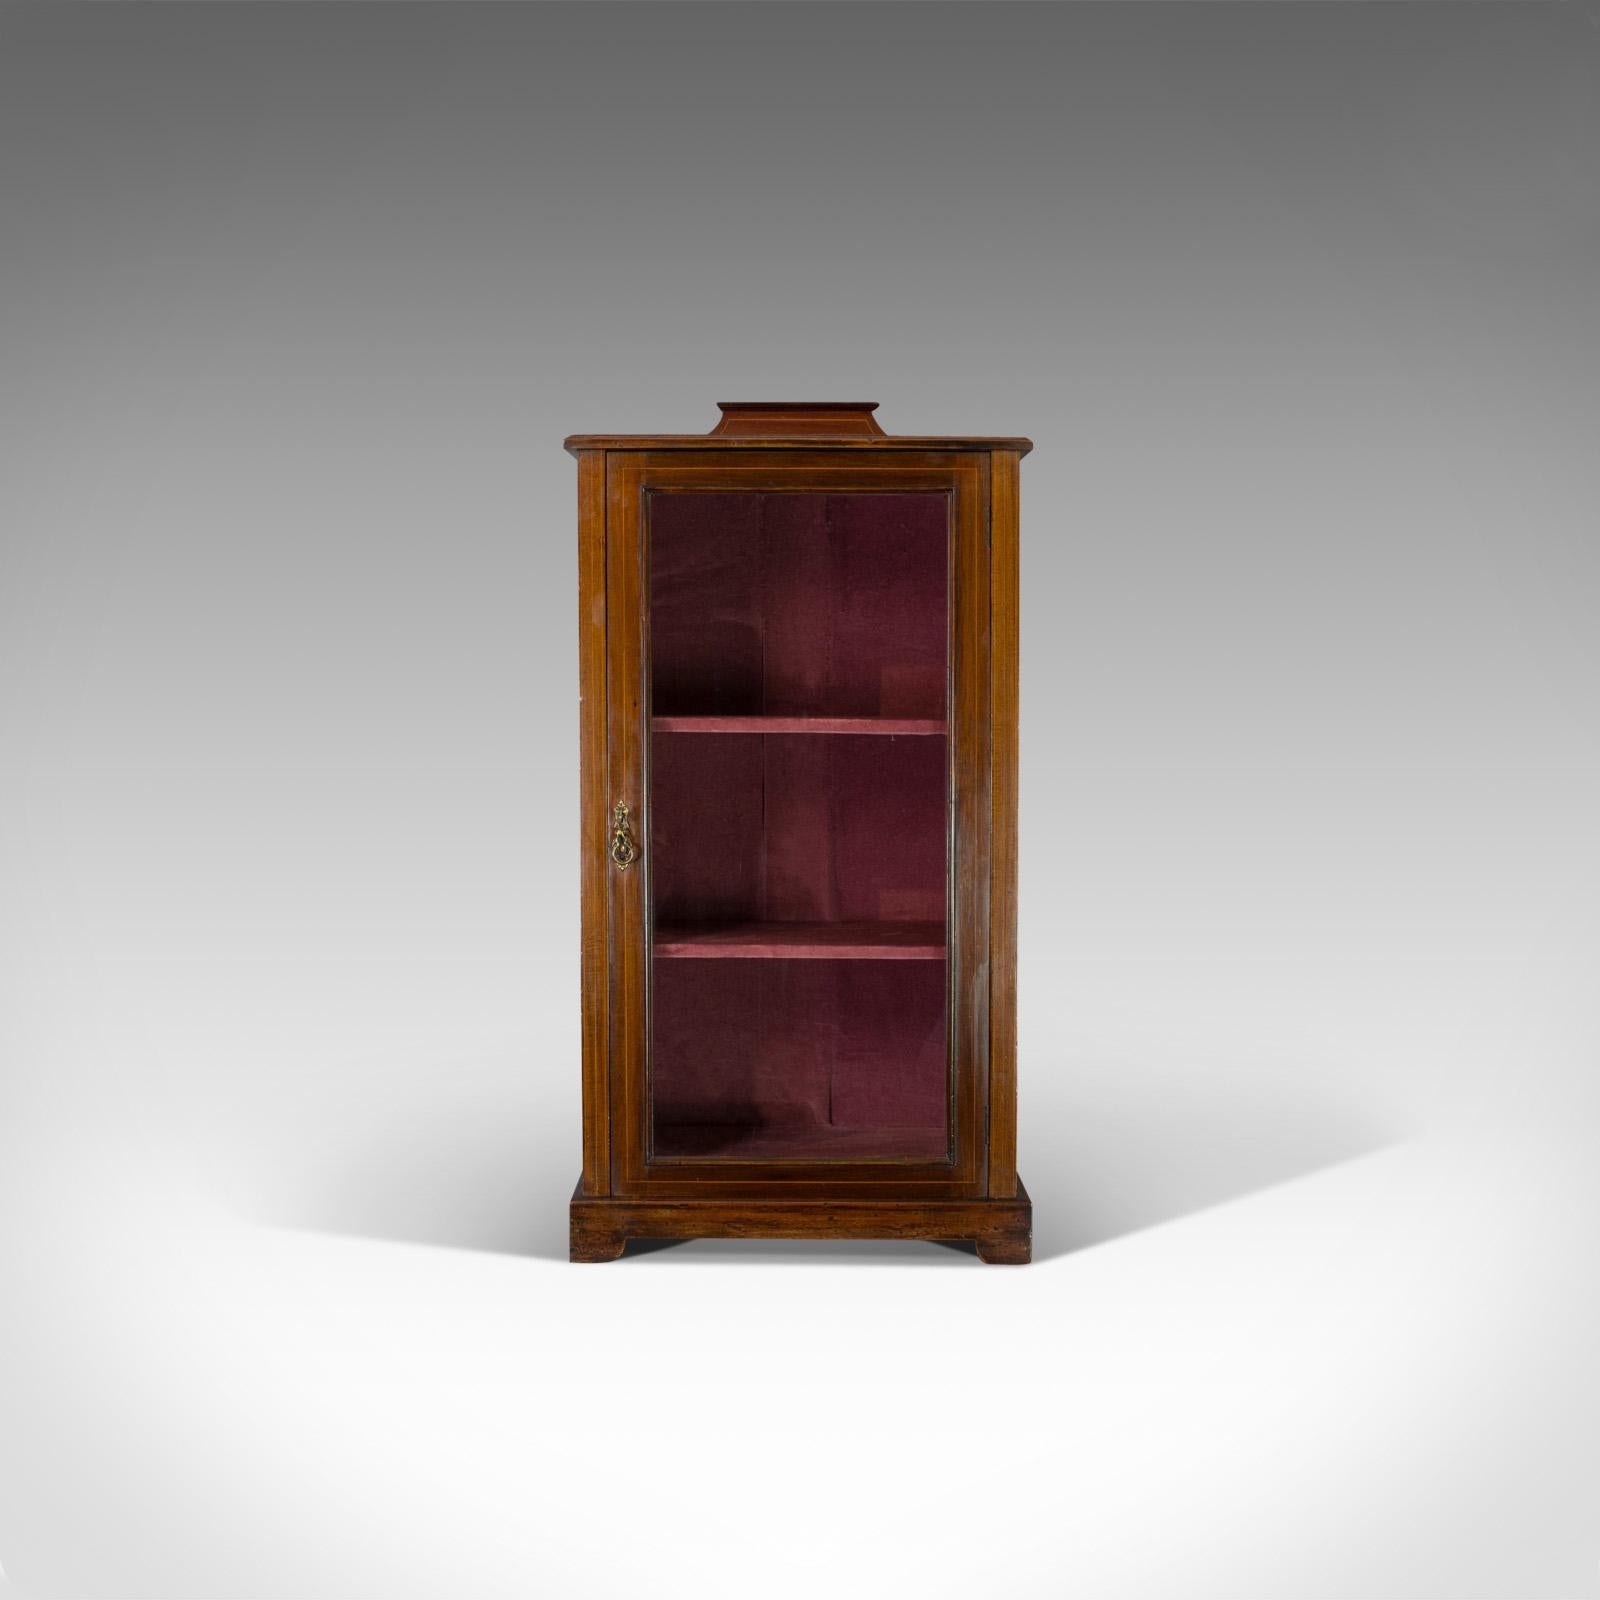 Late Victorian Antique Pier Cabinet, English, Mahogany, Display, Showcase, Late 19th Century